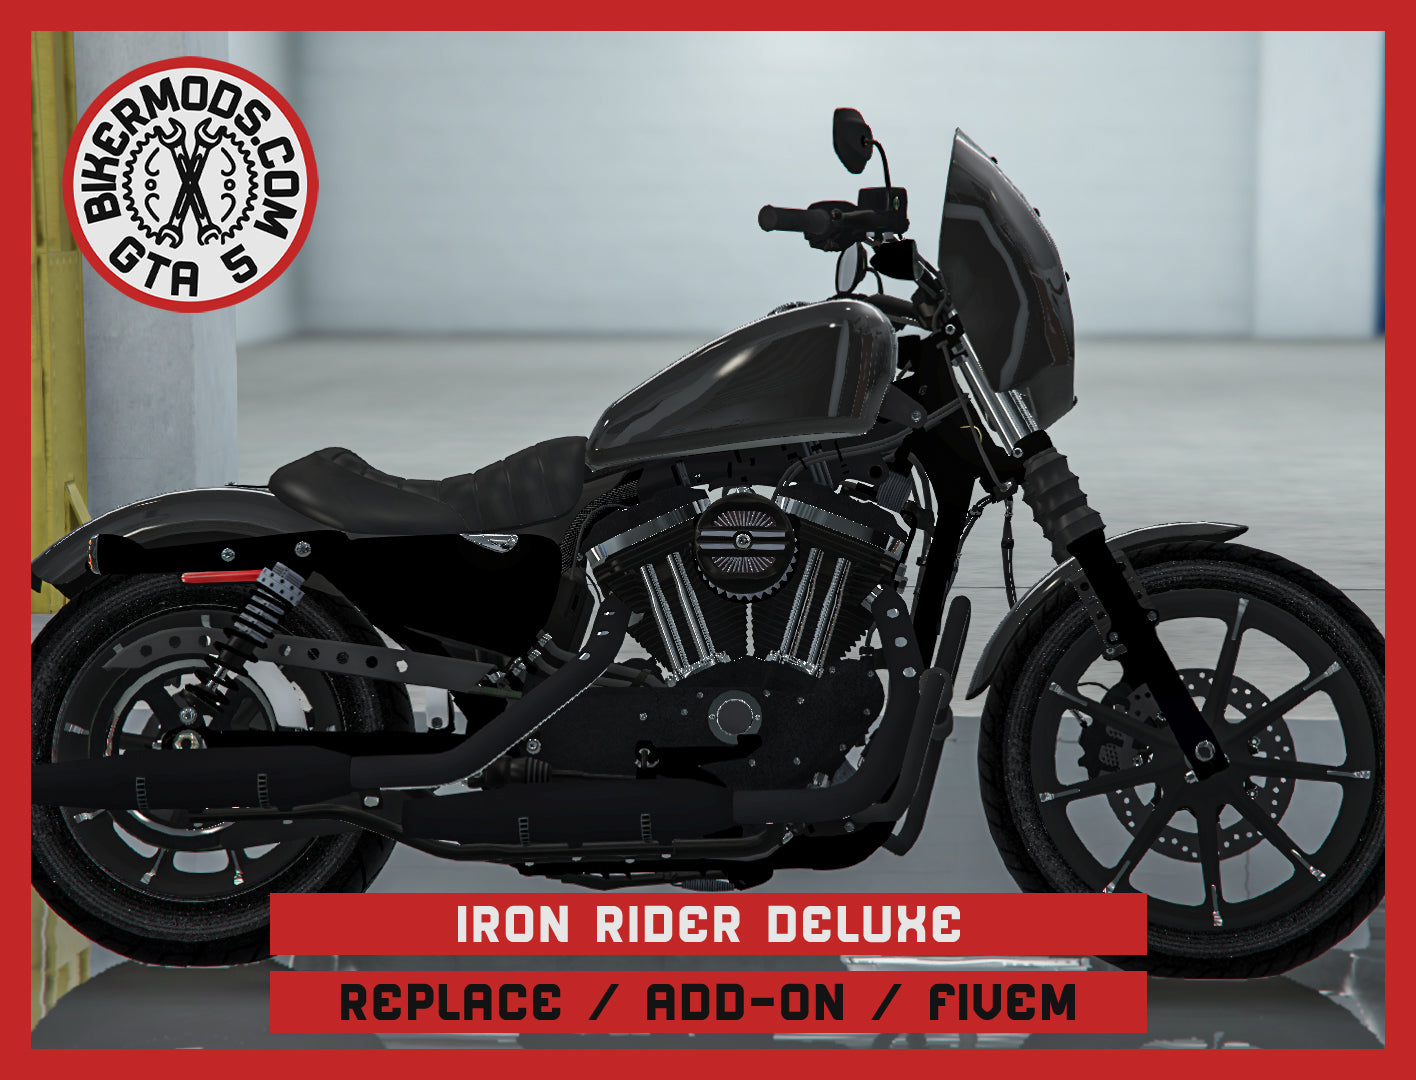 Iron Rider Deluxe (Replace / Add On / FiveM) 180k Poly